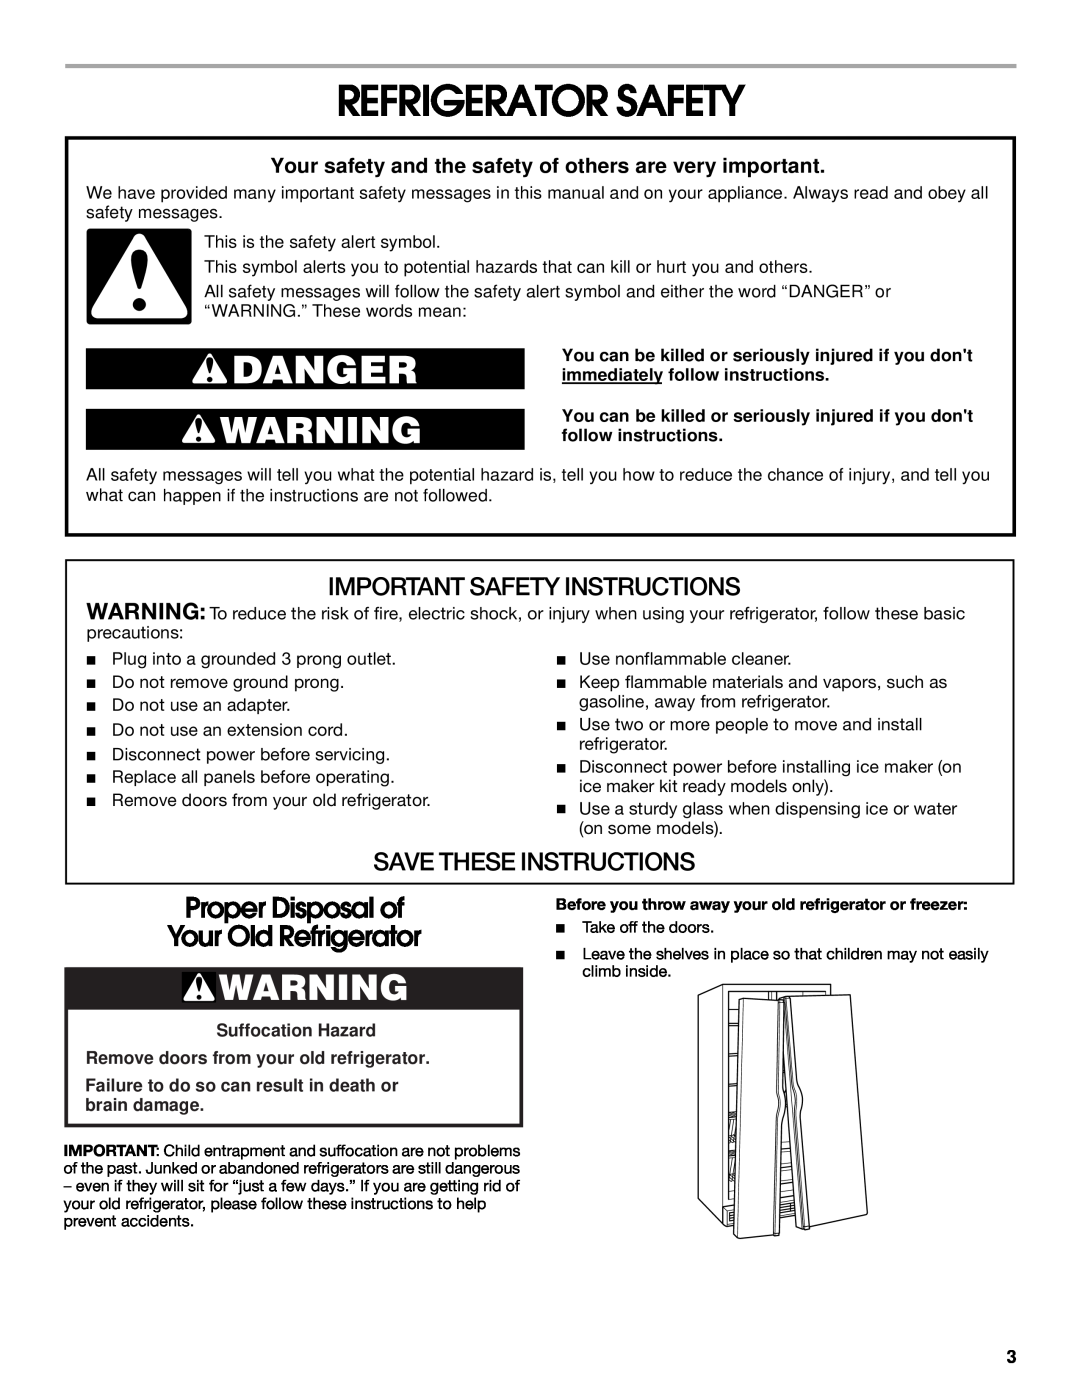 Whirlpool 2188766 Refrigerator Safety, Suffocation Hazard Remove doors from your old refrigerator, Save These Instructions 